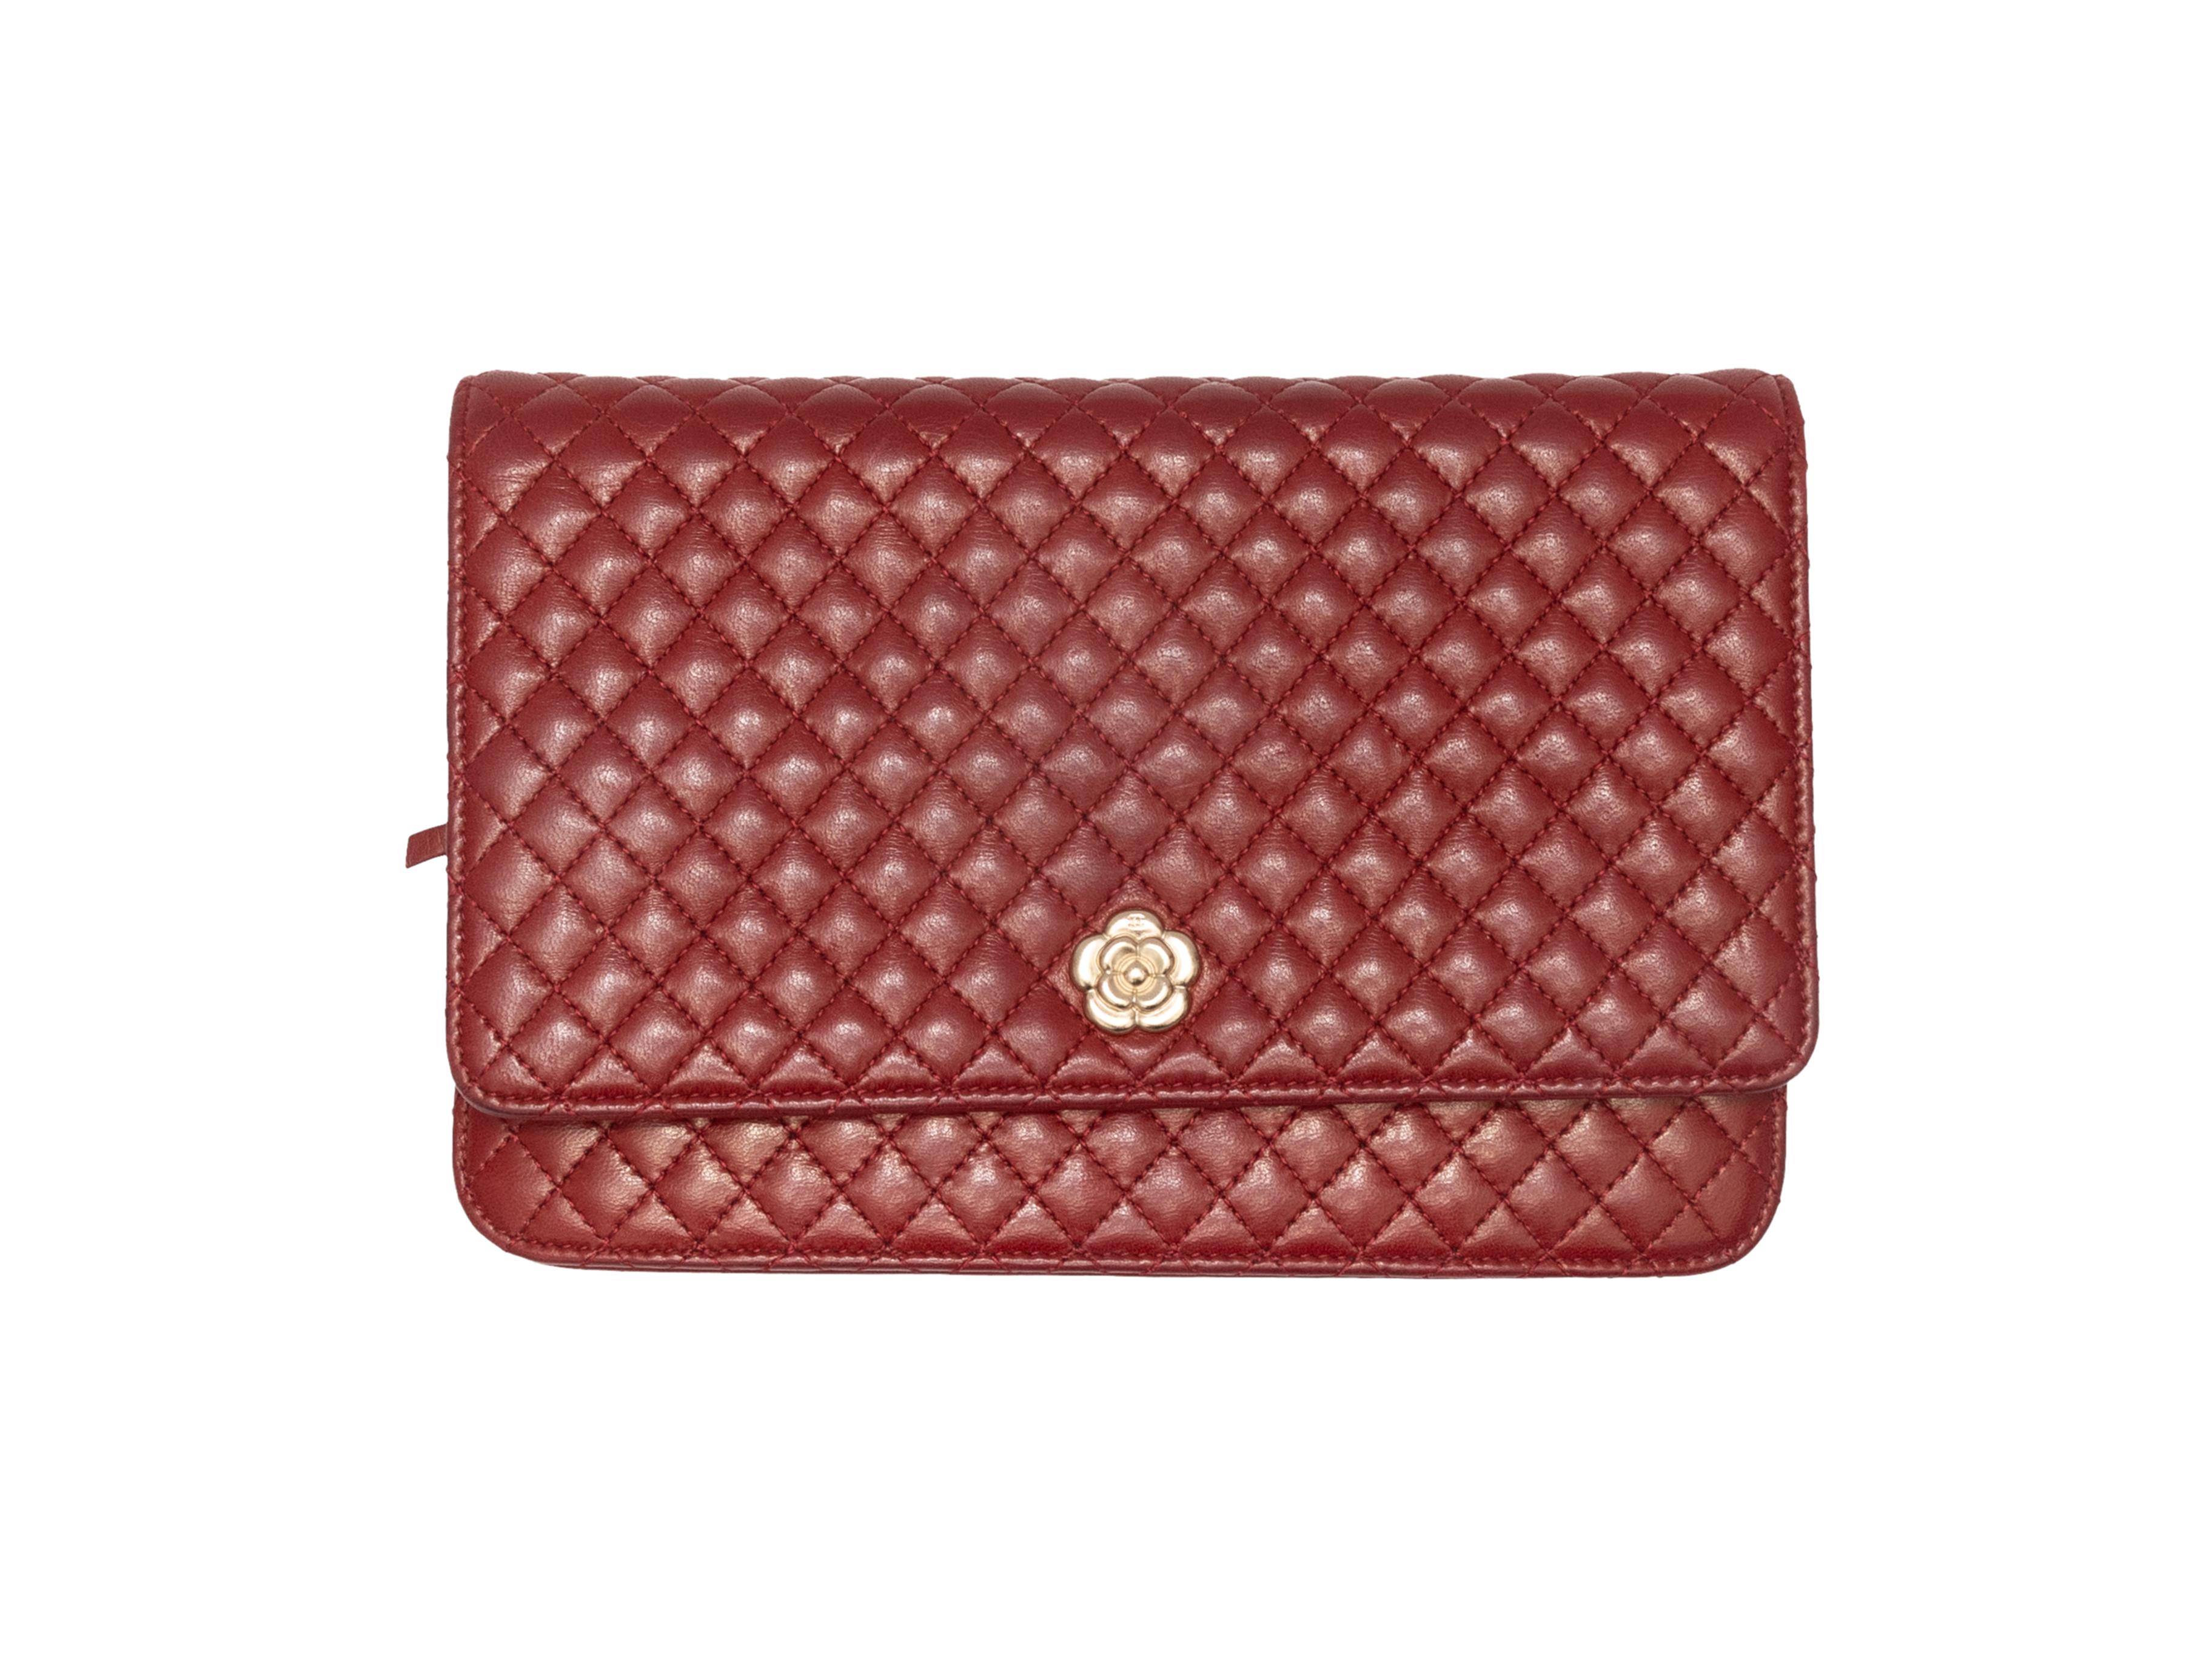 Burgundy Chanel 2008-2009 Micro Camellia Flap Bag. The Micro Camellia Bag features a quilted leather body, gold-tone hardware, multiple interior card and cash slots, an exterior back pocket, a single chain-link and leather strap, and a front flap